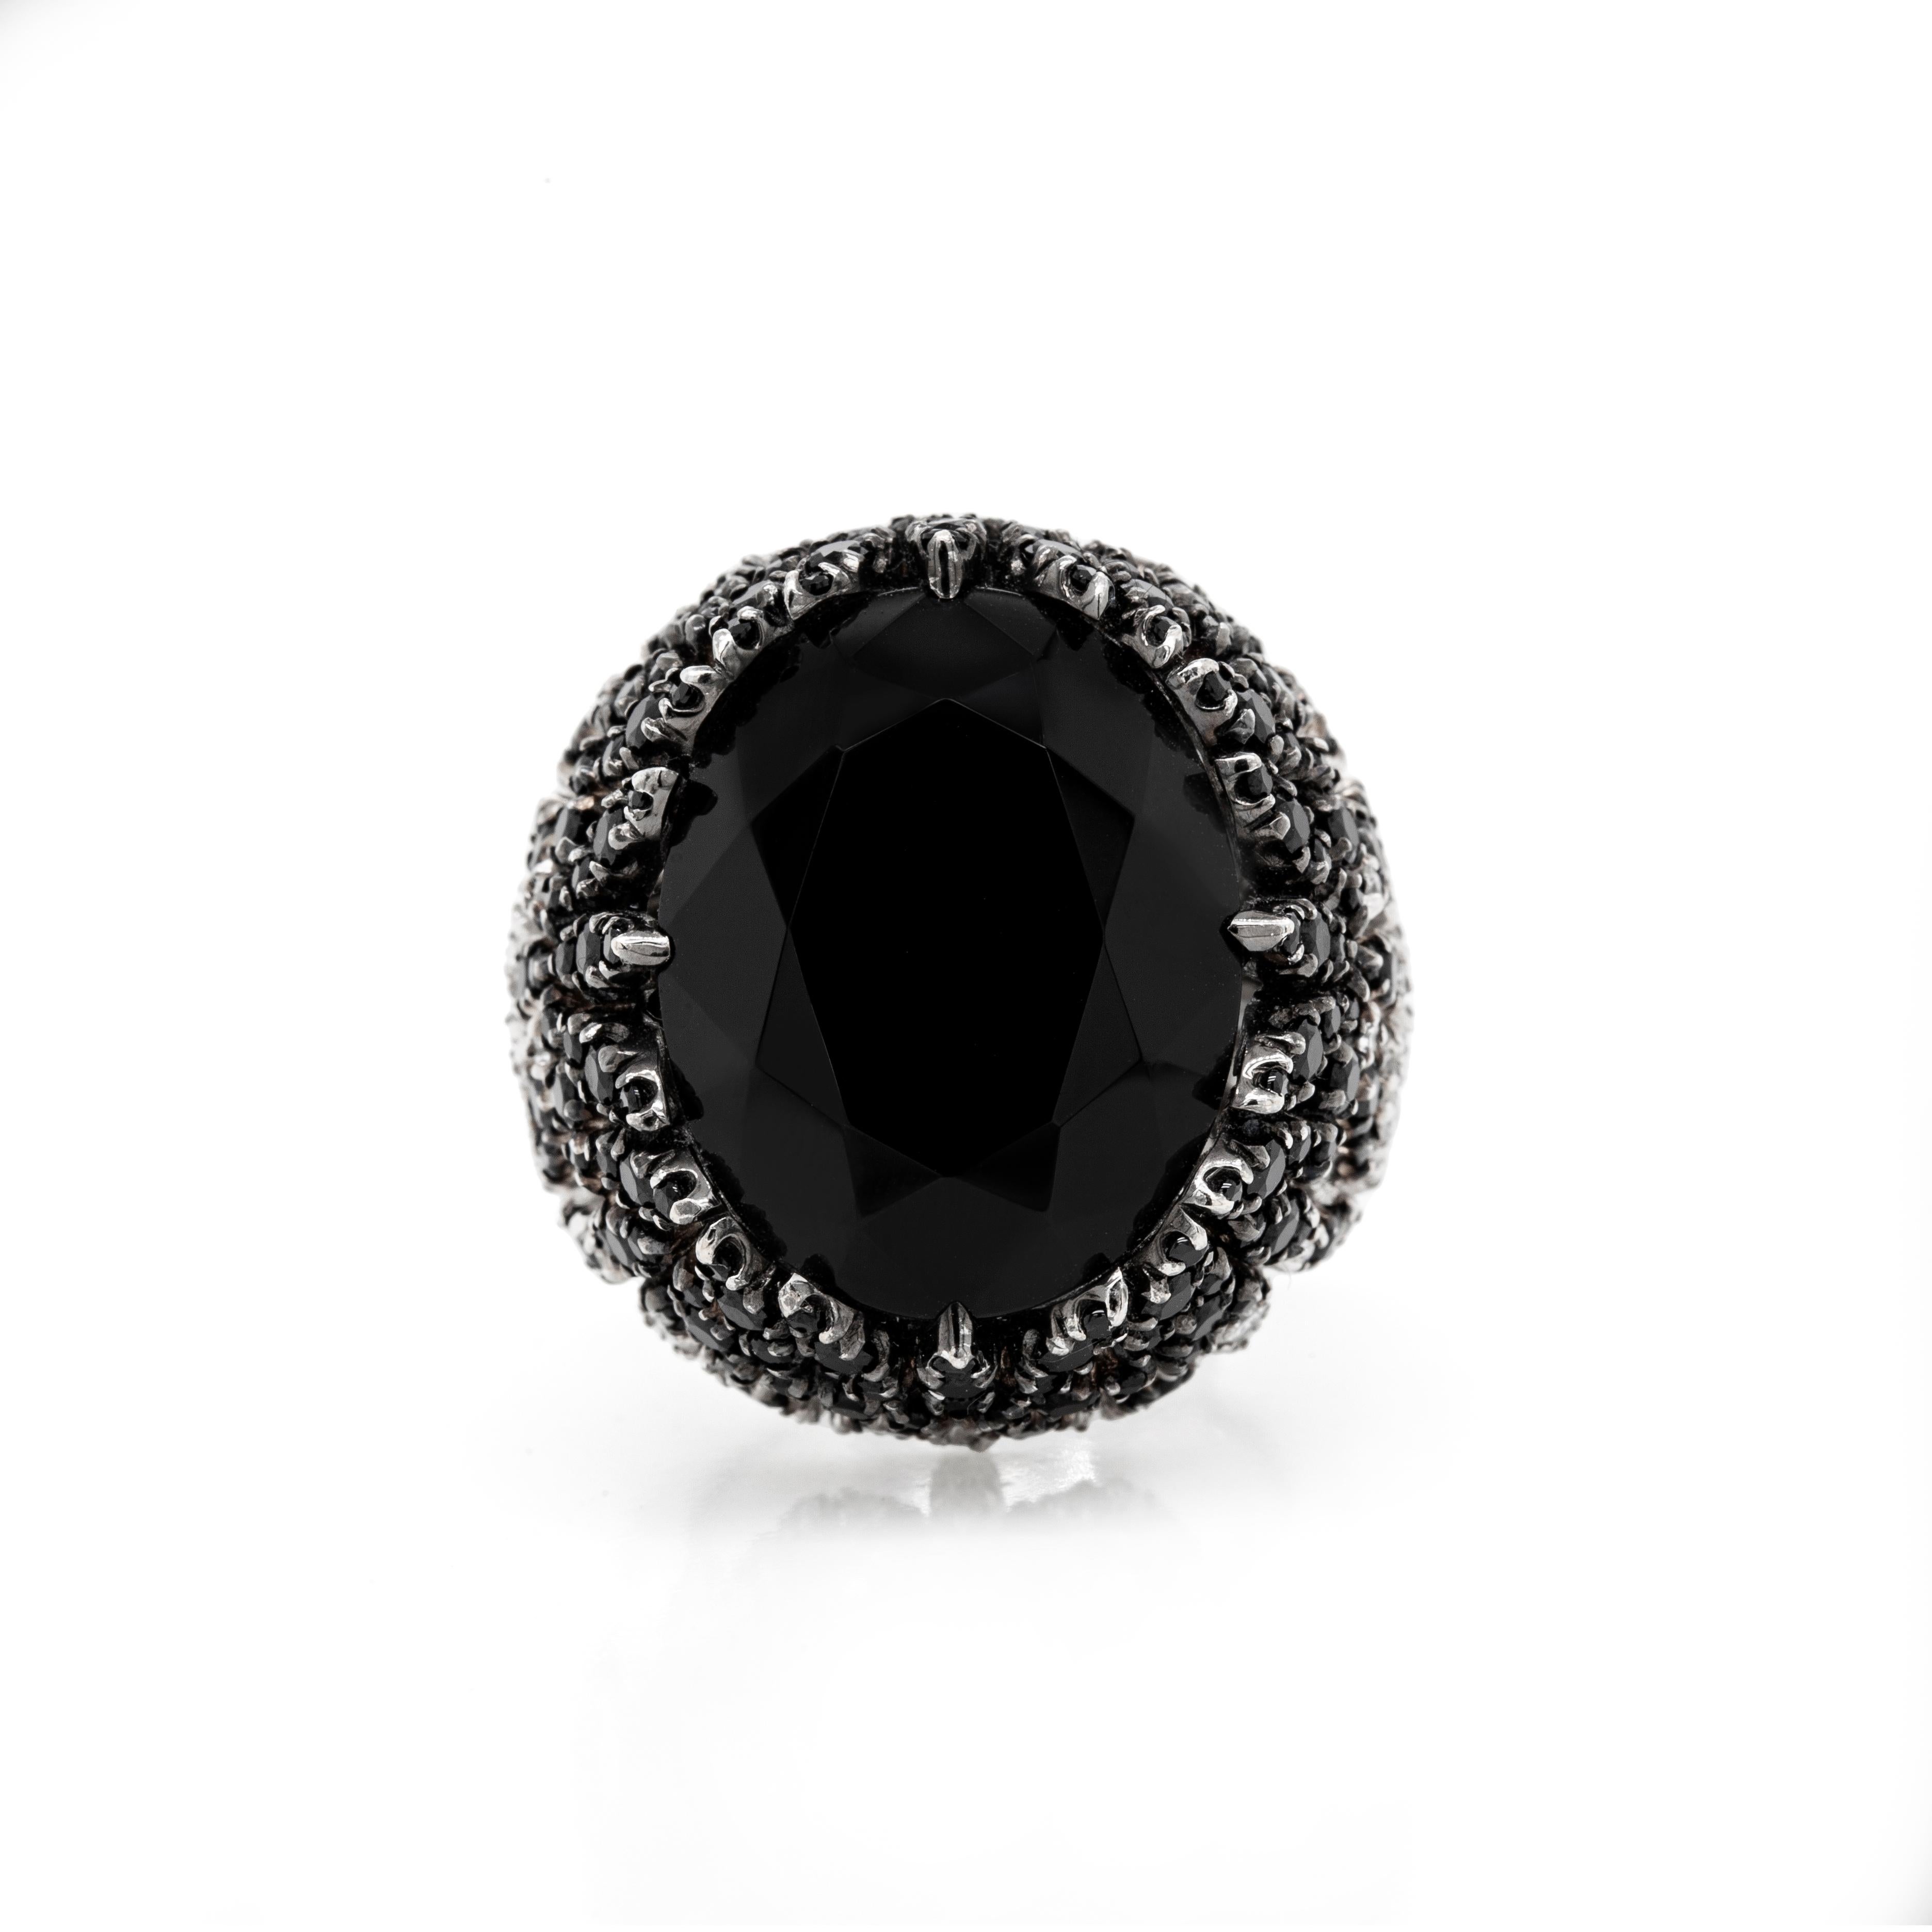 Magnificent and bold, this breathtaking cocktail ring from Pasquale's Bruni 'Ghirlanda' collection is masterfully handcrafted from 18 carat white gold. Taking center-stage is an impressive oval onyx measuring approximately 21x17mm, beautifully